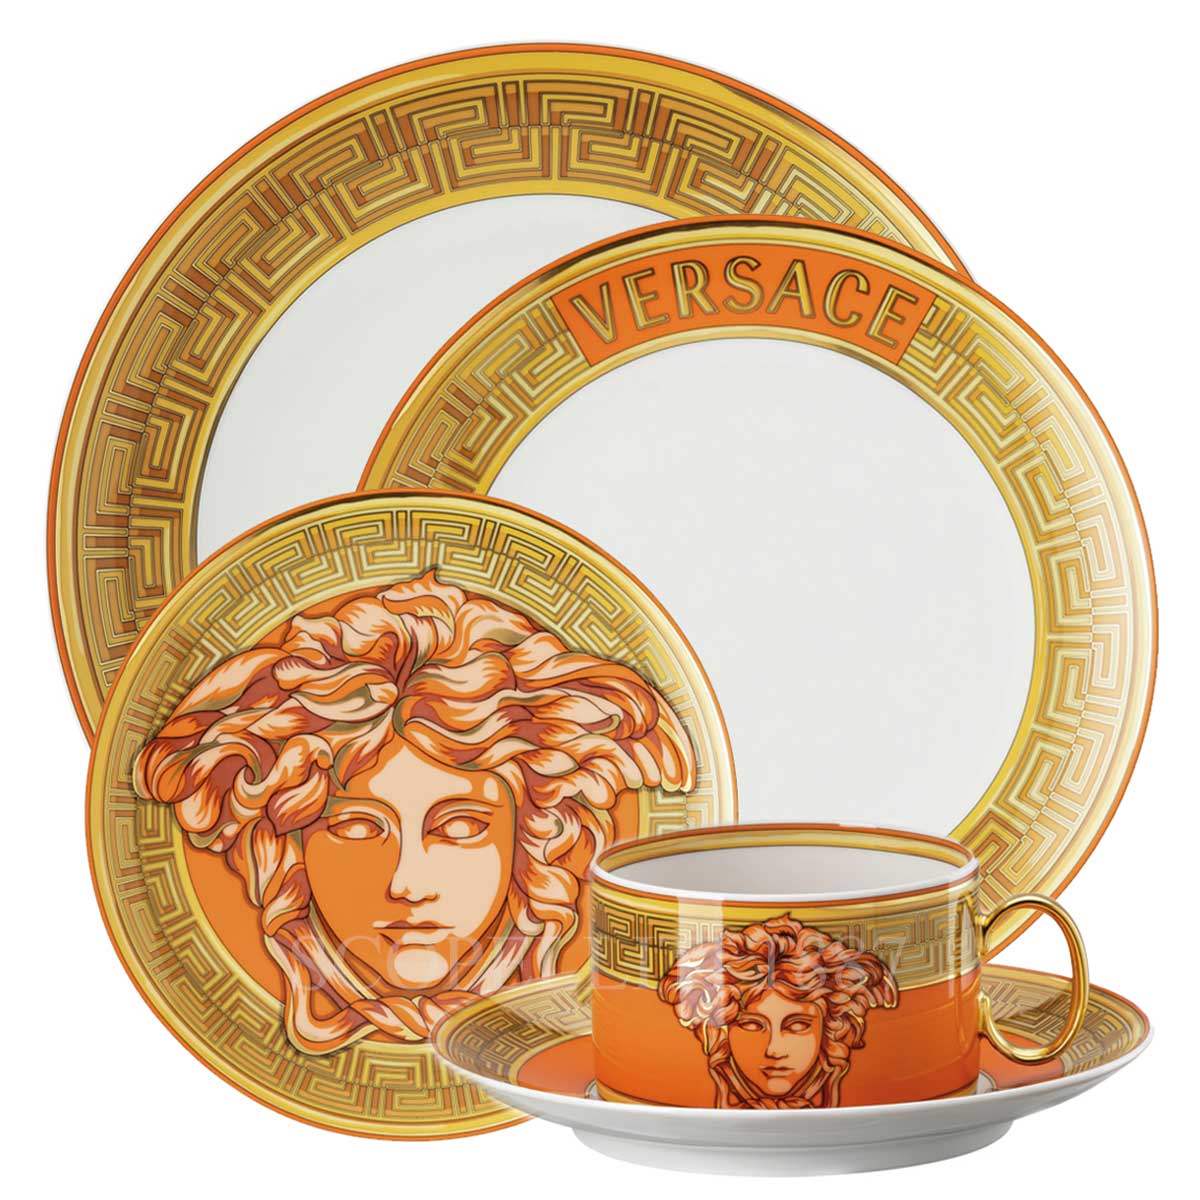 Versace Medusa Amplified Dinner Plate 28 cm - Home Collection